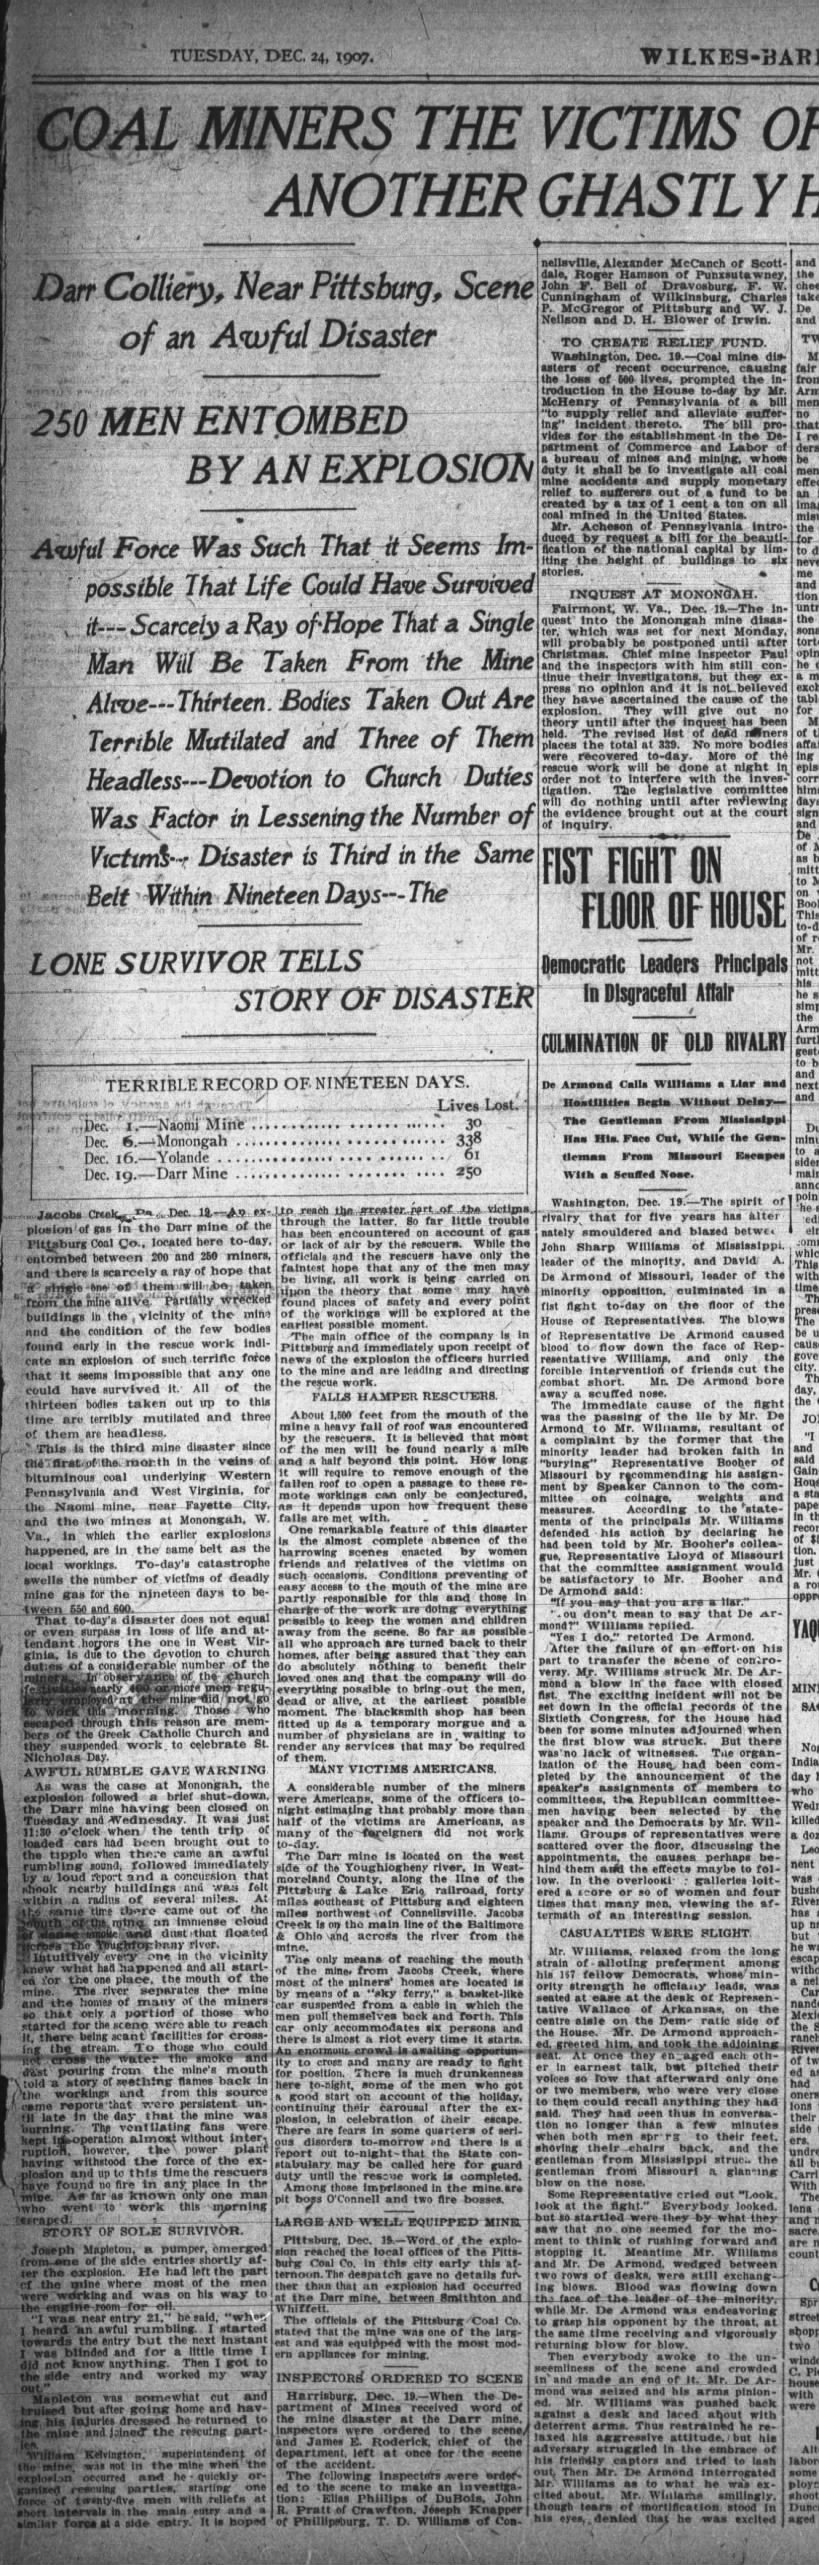 Mining disaster story, Wilkes-Barre Semi-Weekly Record 24 Dec 1907